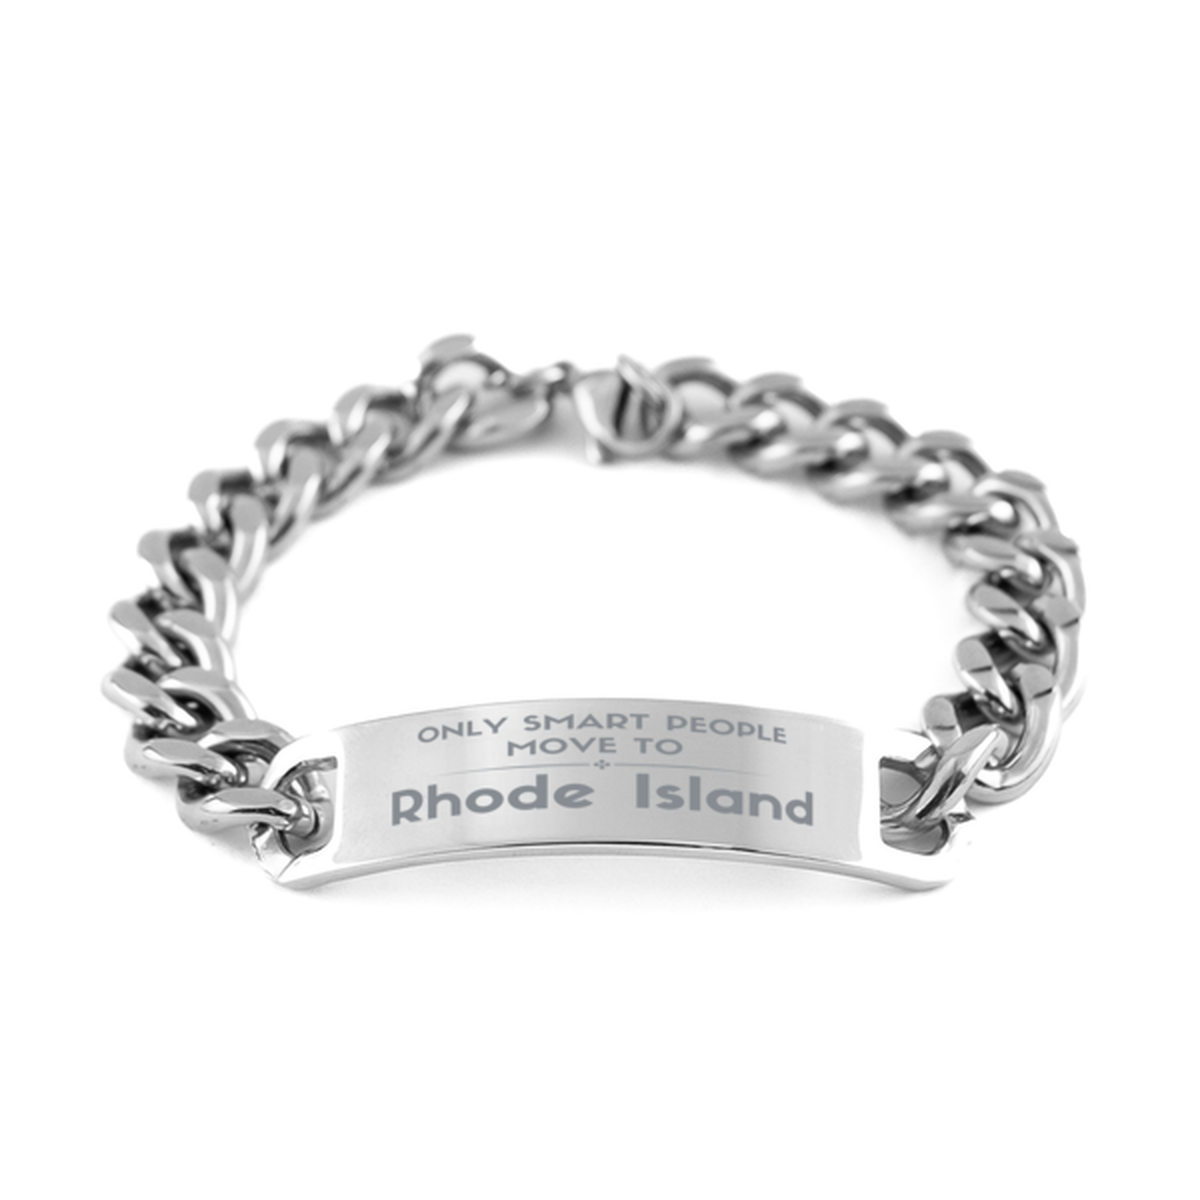 Only smart people move to Rhode Island Cuban Chain Stainless Steel Bracelet, Gag Gifts For Rhode Island, Move to Rhode Island Gifts for Friends Coworker Funny Saying Quote